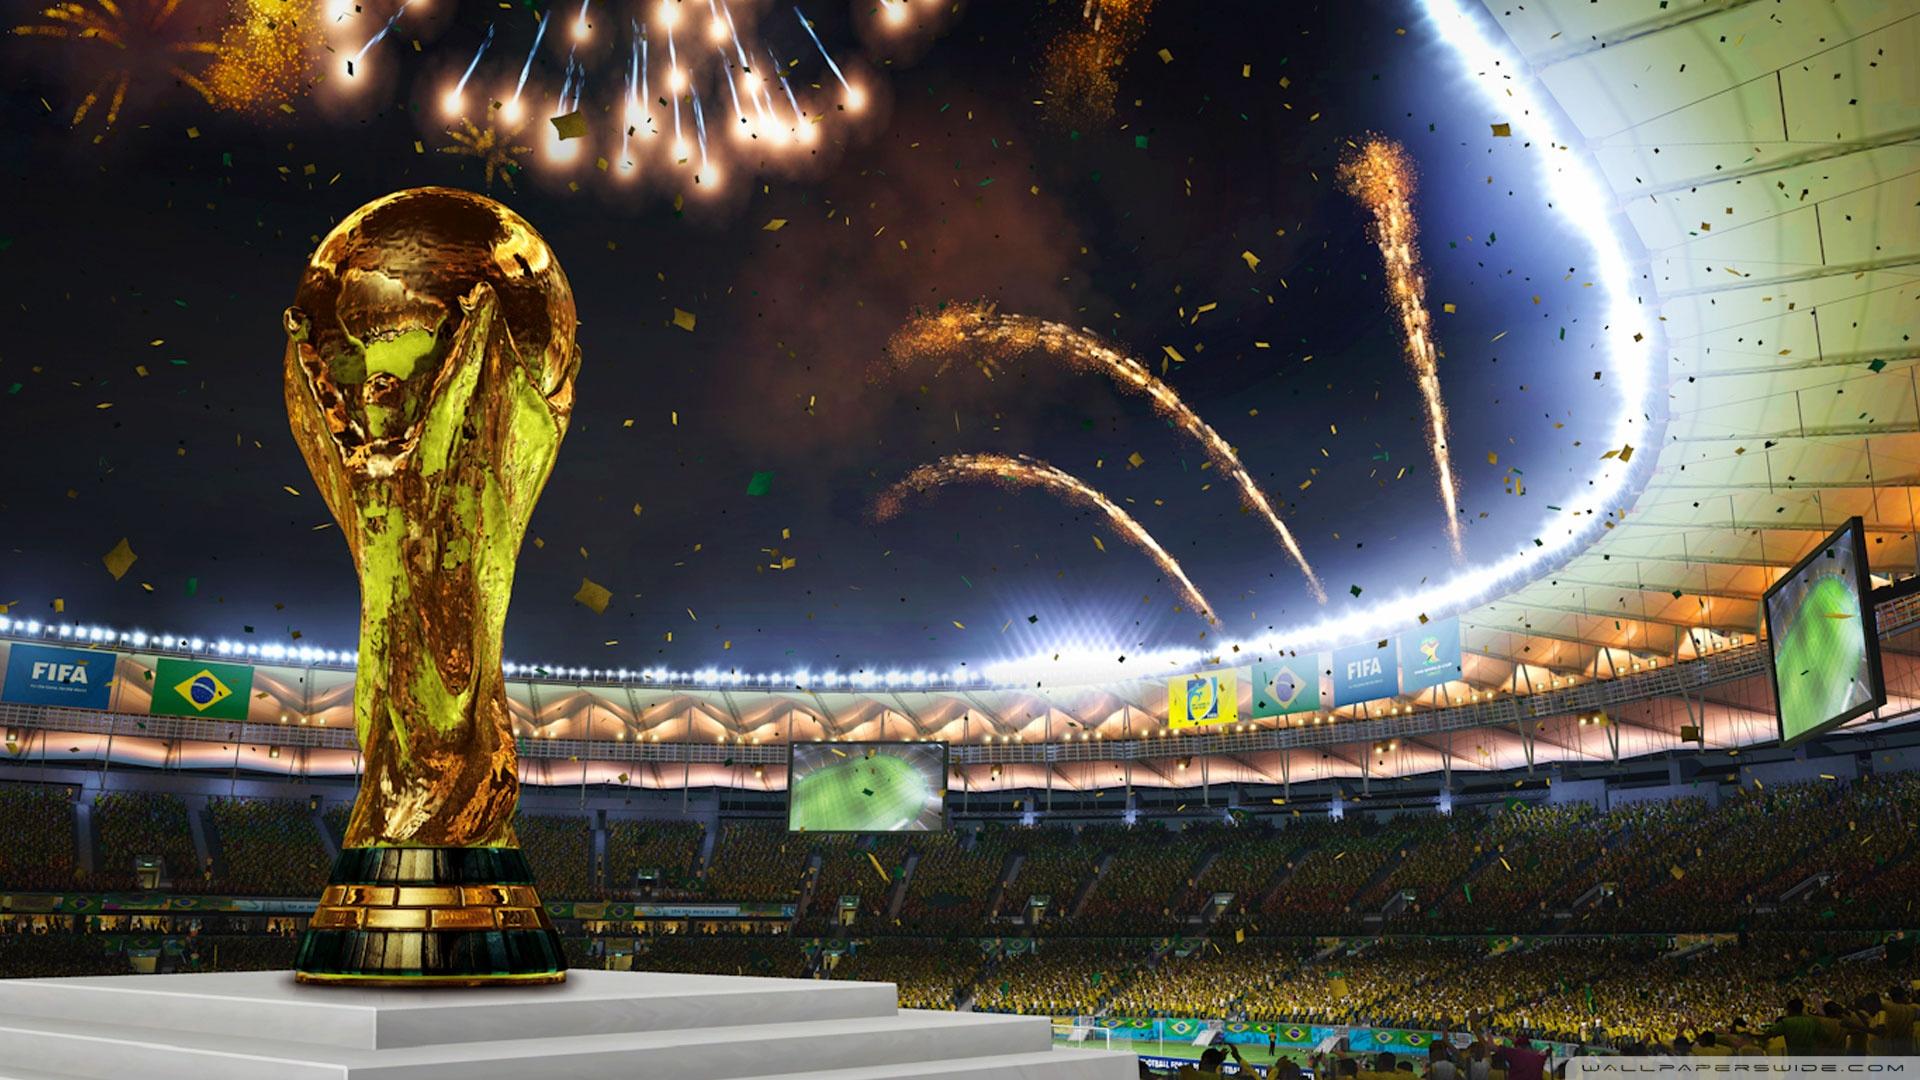 FIFA World Cup Wallpapers - Top Free FIFA World Cup Backgrounds